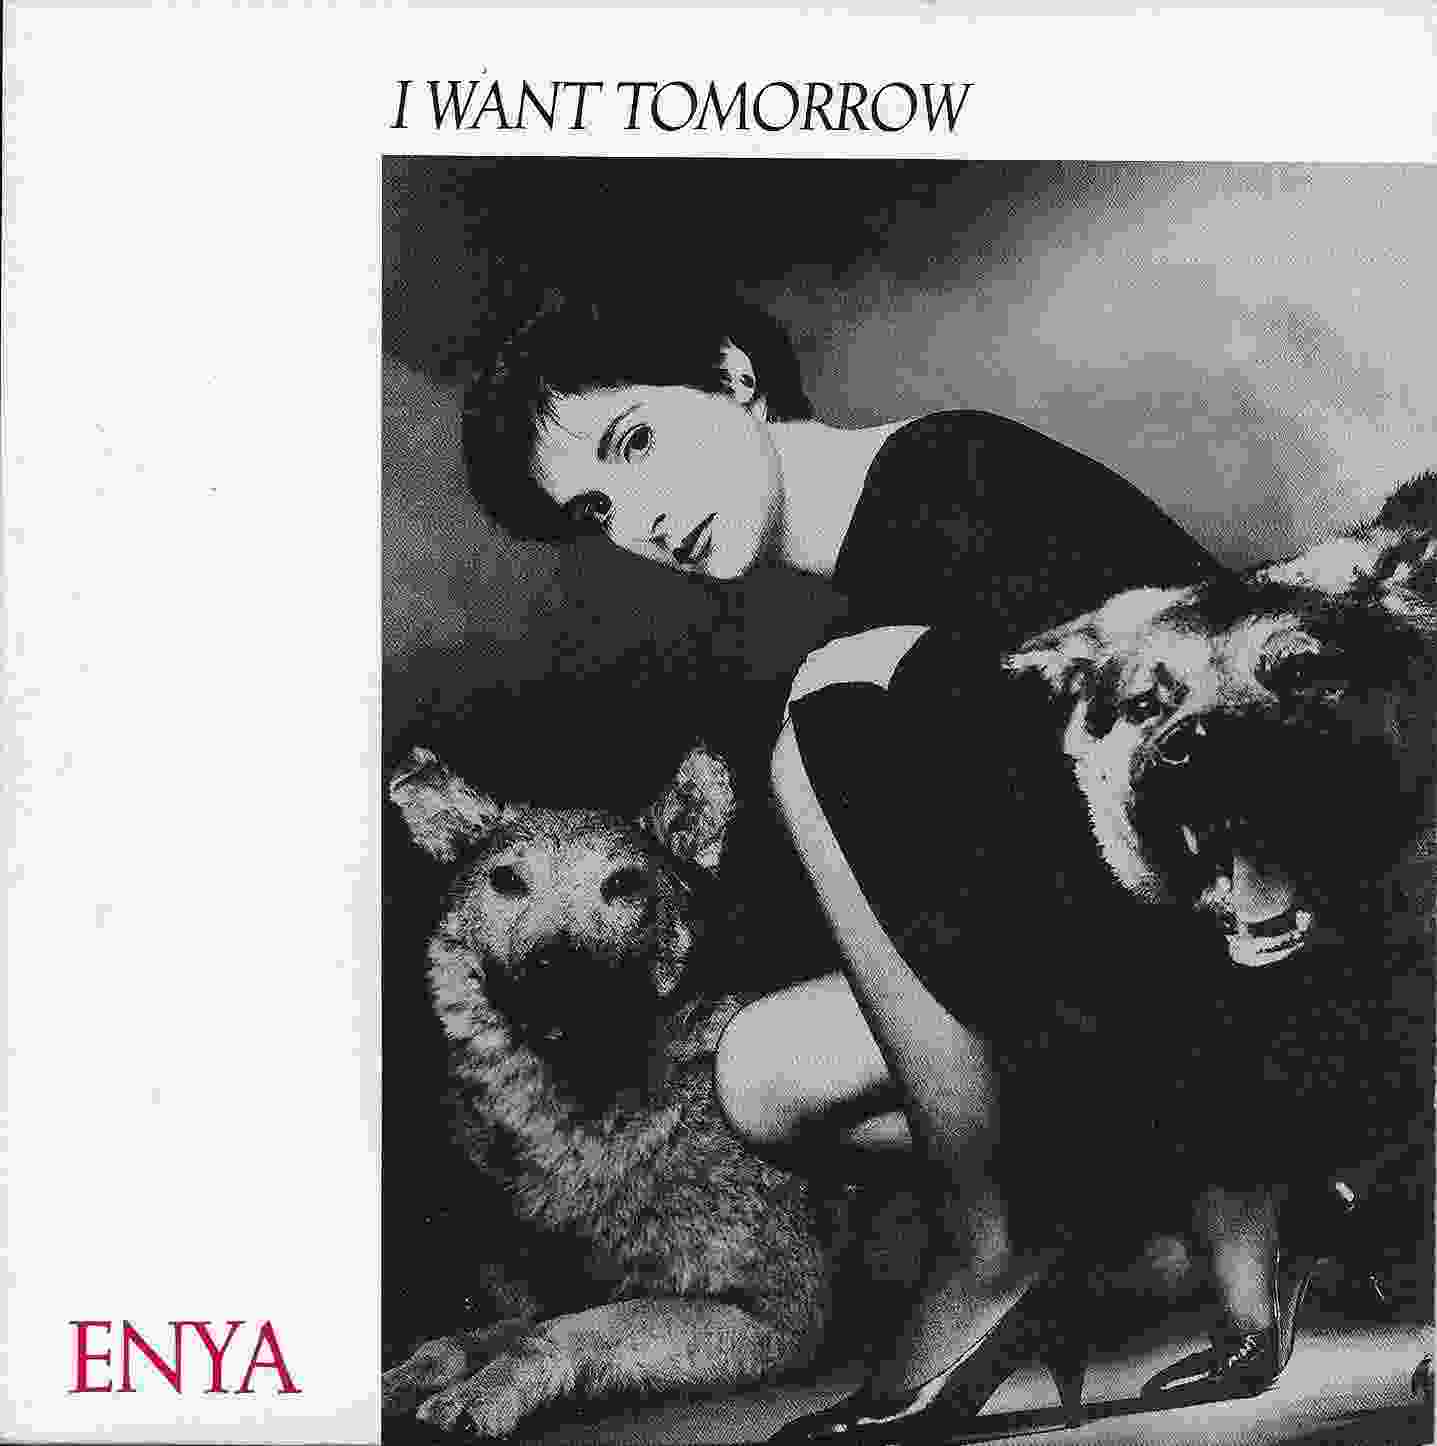 Picture of RESL 201 I want tomorrow (The Celts) by artist Enya from the BBC records and Tapes library